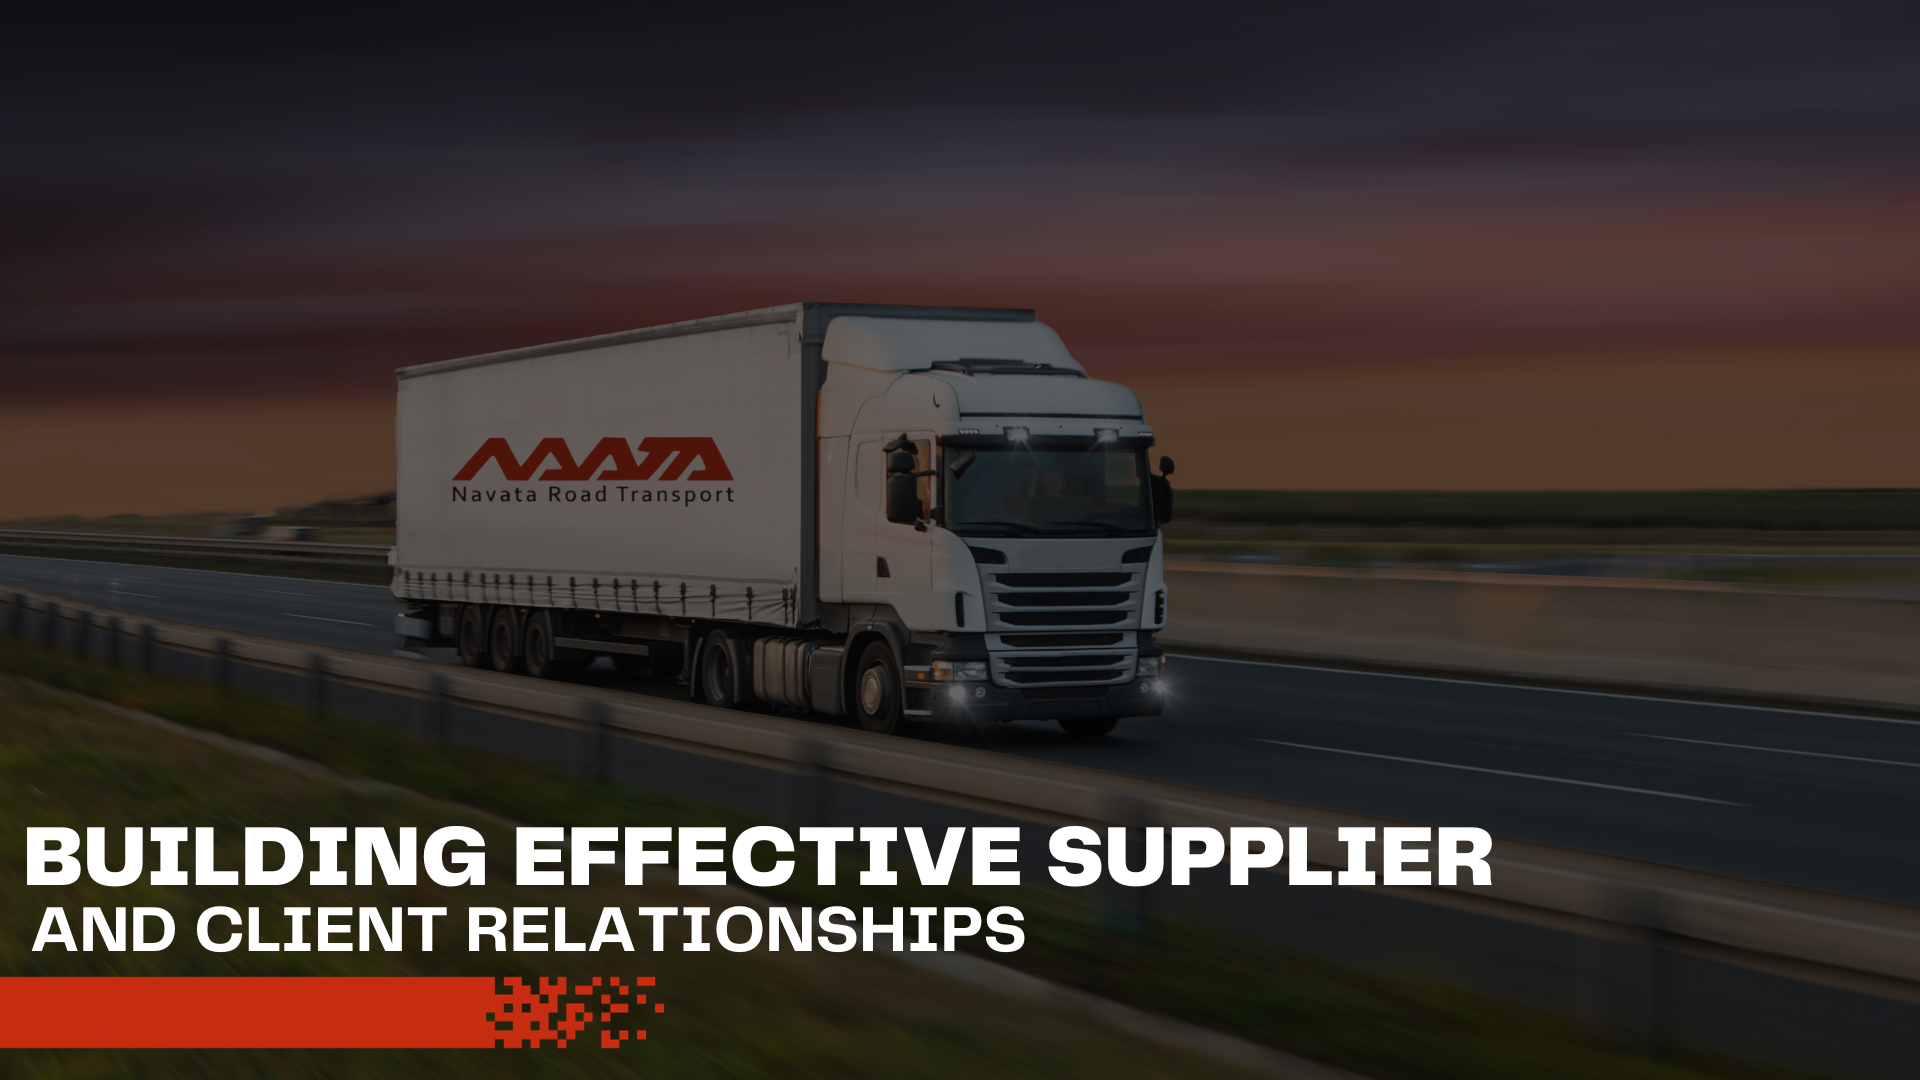 Building Effective Supplier and Client Relationships